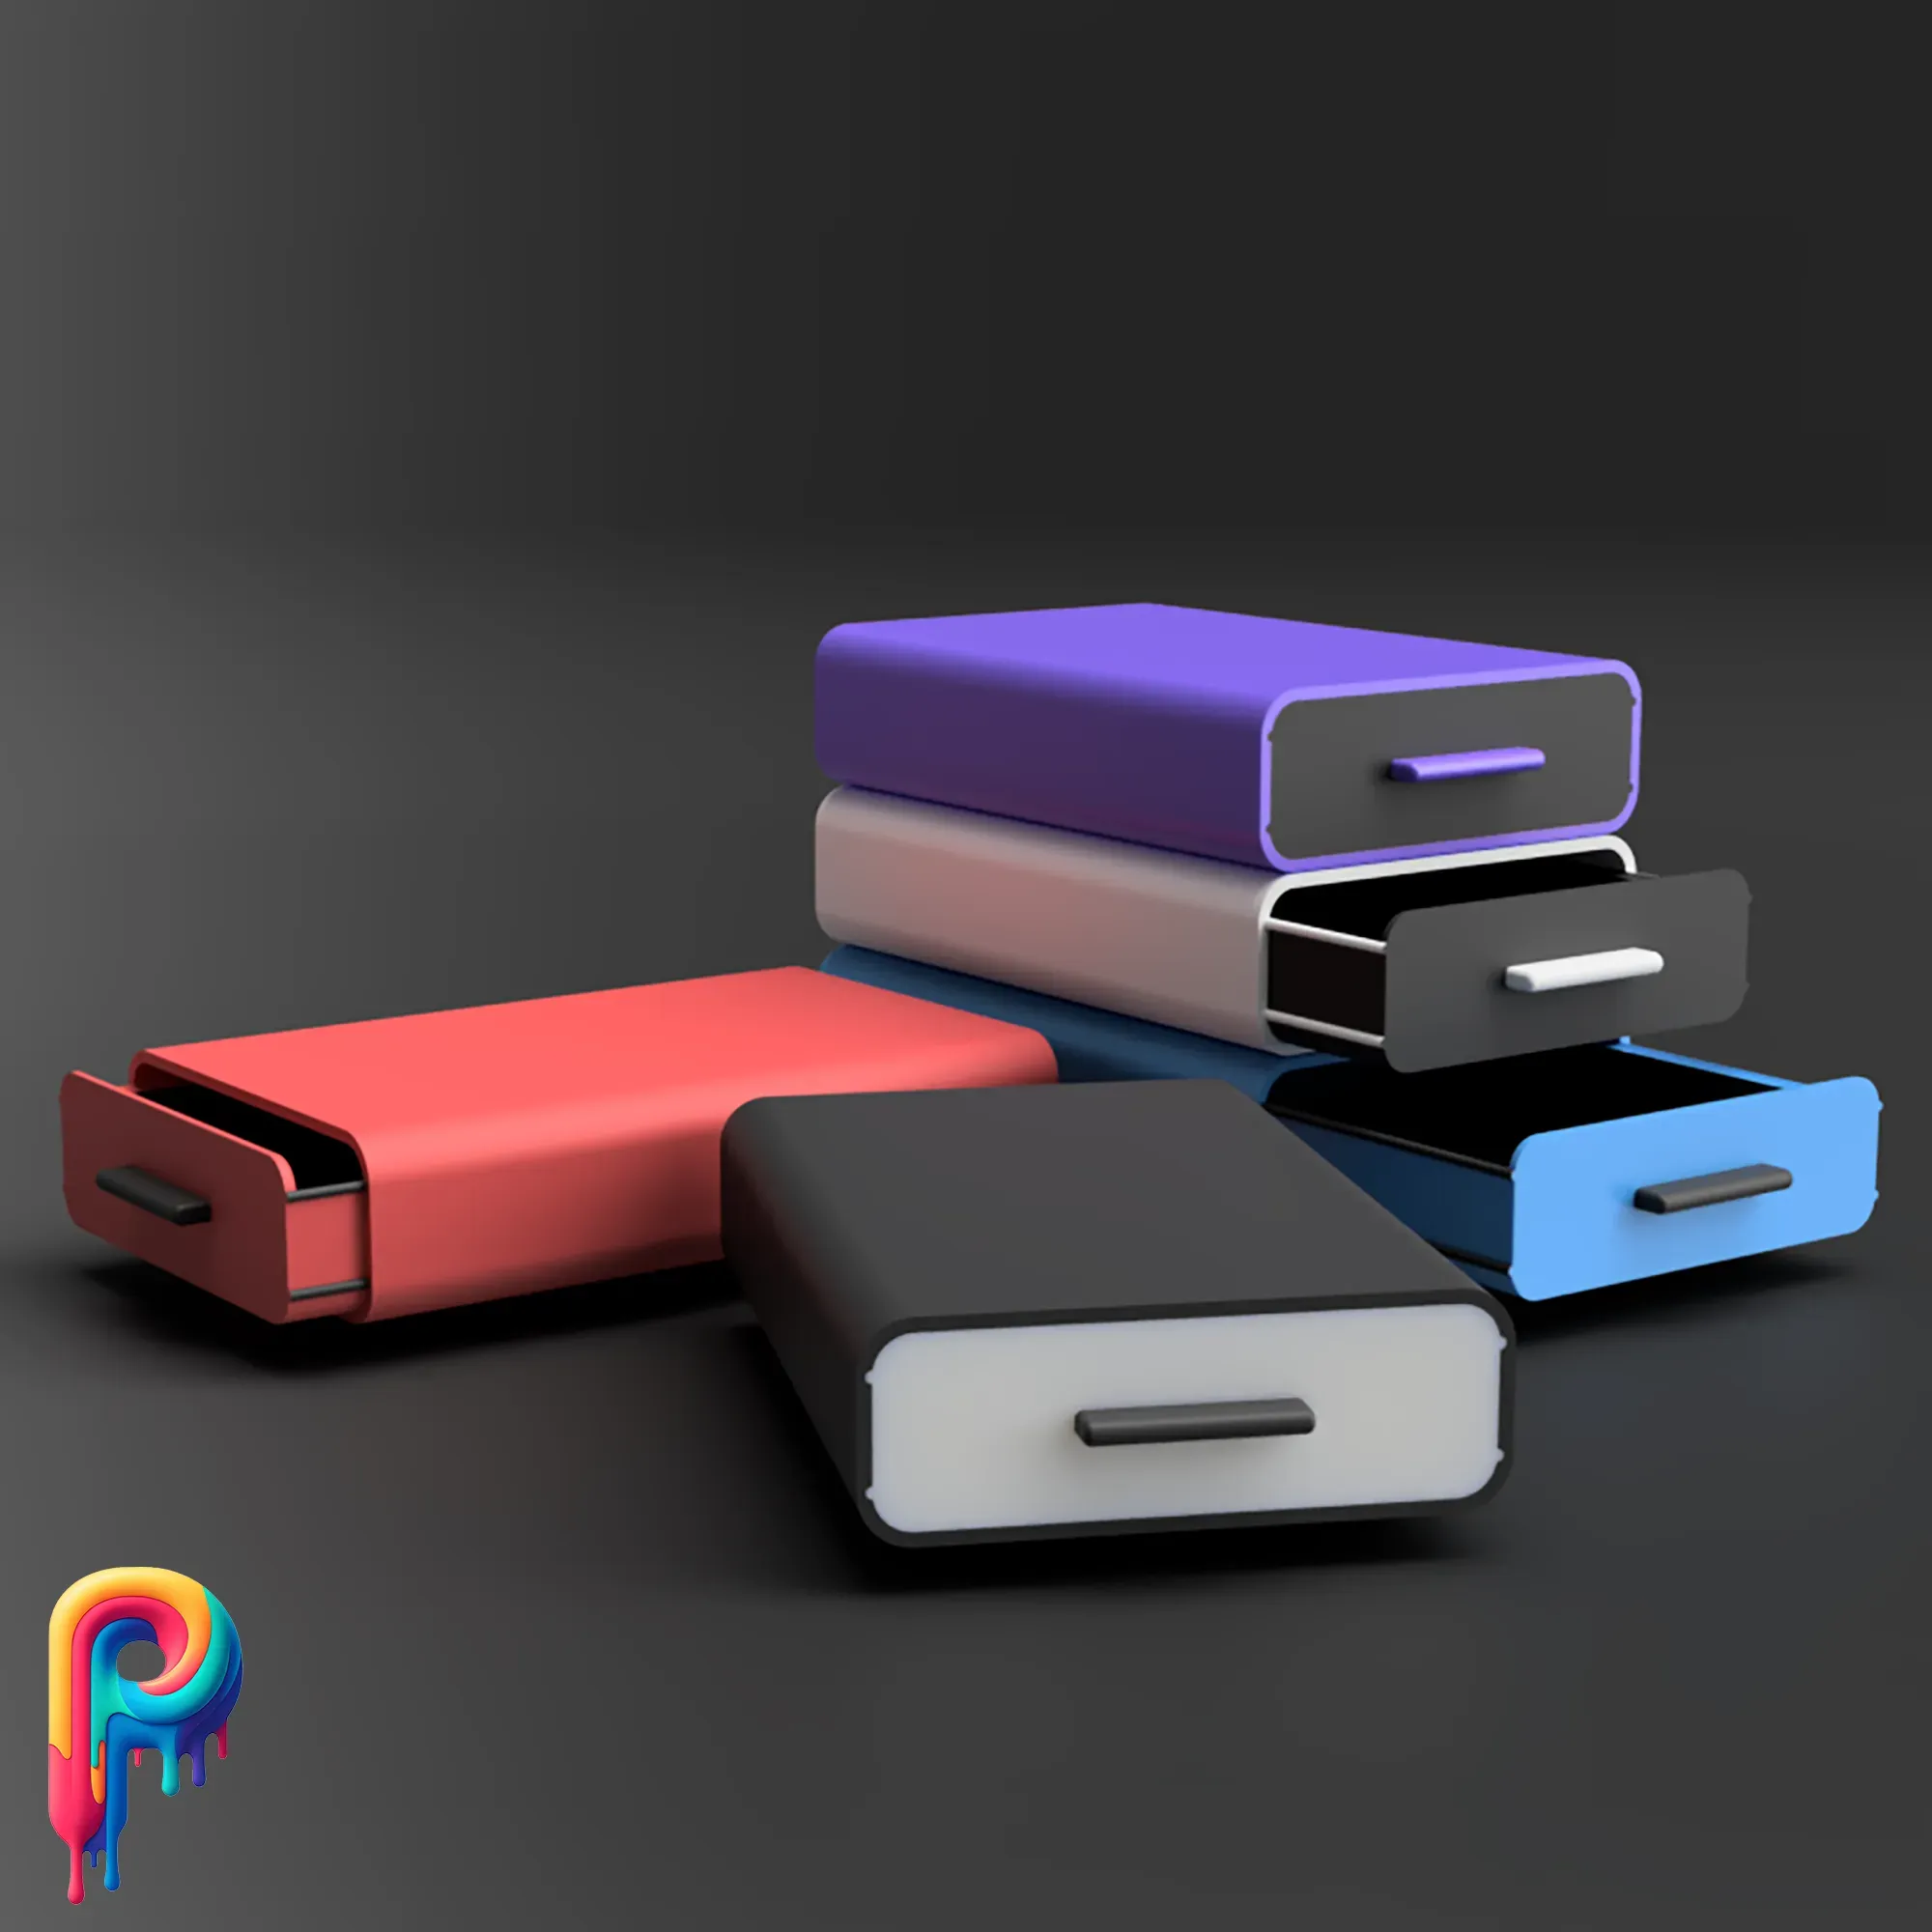 Stackable Drawers by Polymeria